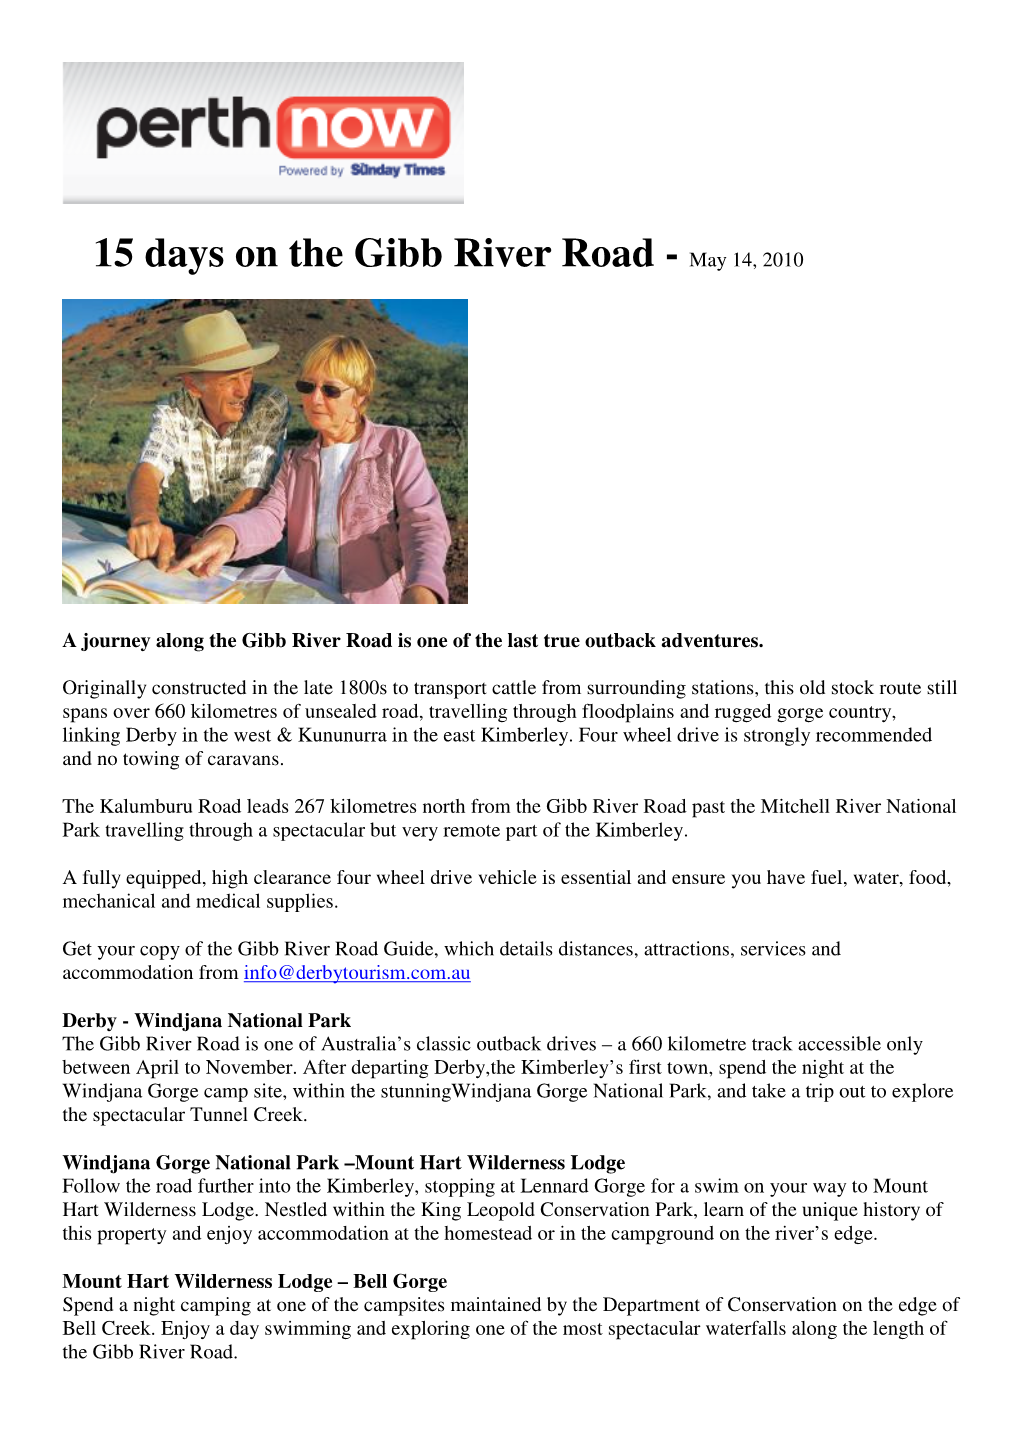 15 Days on the Gibb River Road - May 14, 2010